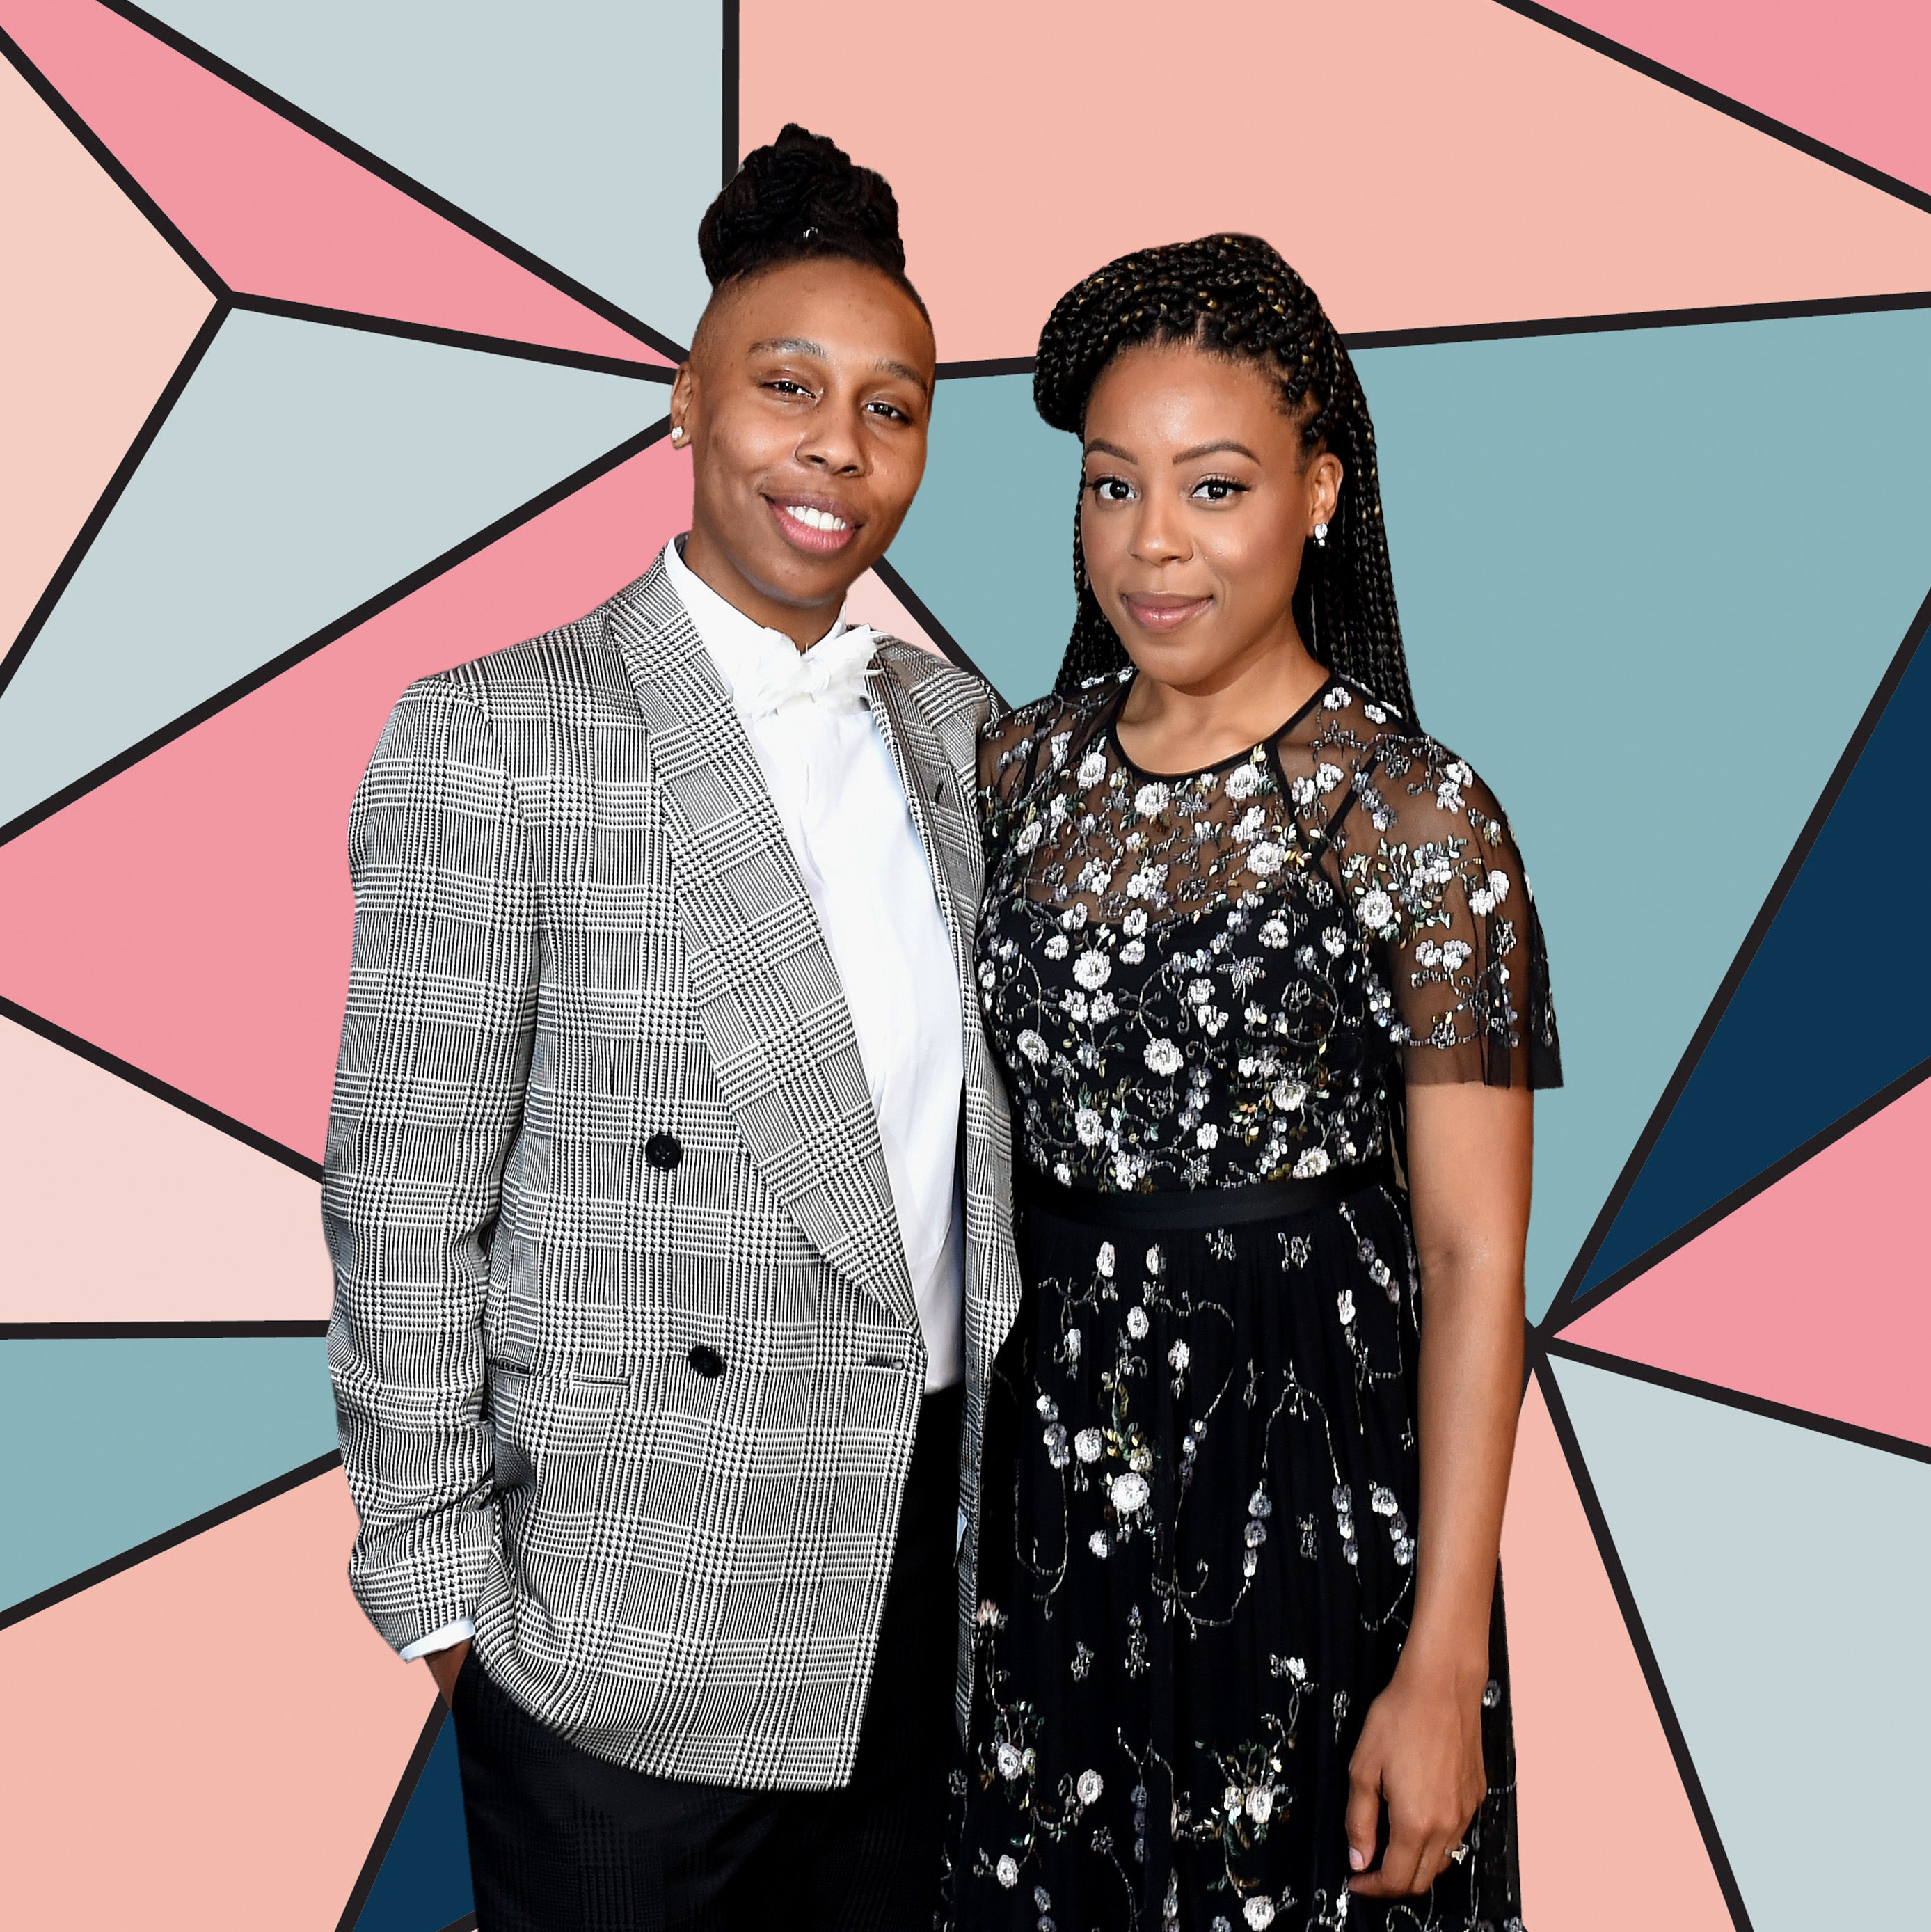 How Perfect Lena Waithe Got A Pair Of Engagement Sneakers From Her Fiancée Instead Of A Ring